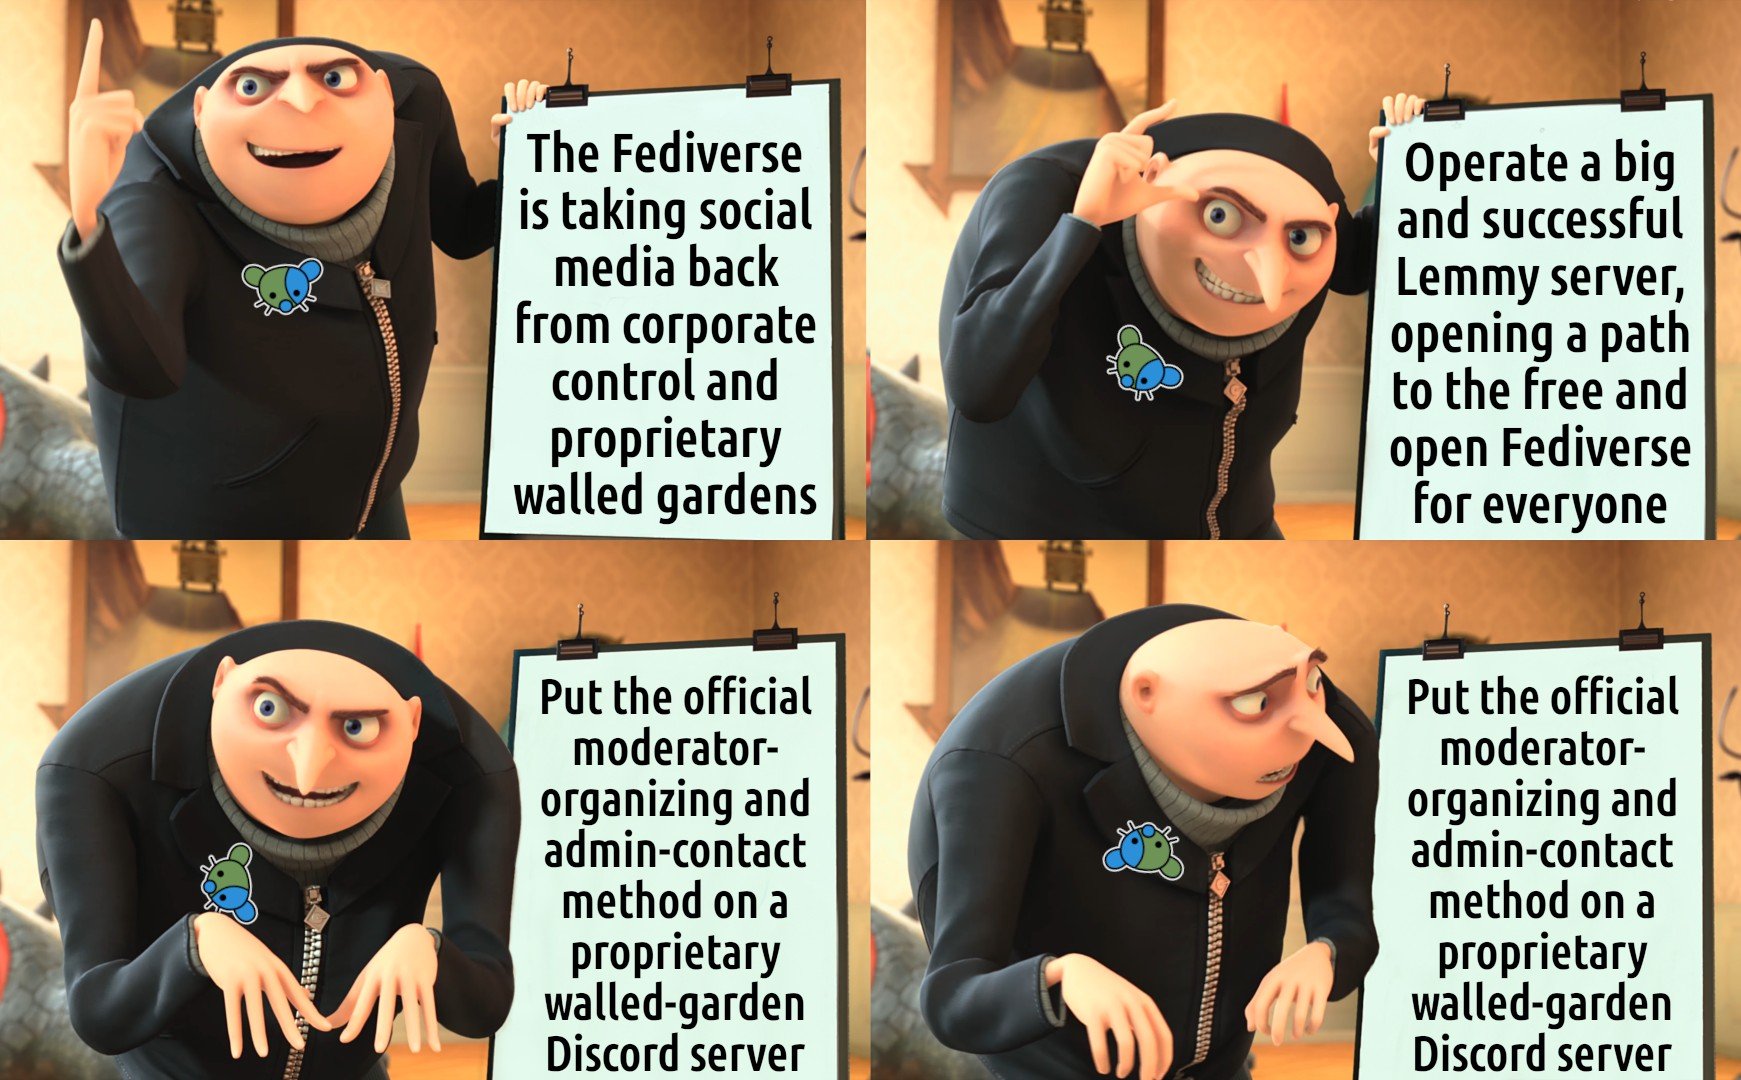 Image is a popular four-panel meme featuring Gru from "Despicable Me" showing off his evil plan on a large pad. In this version Gru is wearing a lapel pin of the Lemmy.world logo. Frame one: the pad says "The Fediverse is taking social media back from corporate control and proprietary walled gardens." Gru looks proud. Frame 2: the pad says "Operate a big and successful Lemmy server, opening a path to the free and open Fediverse for everyone." Gru looks happy. Frame 3: the pad says "Put the official moderator-organizing and admin-contact method on a proprietary walled-garden Discord server." Gru looks sneaky. Frame 4: the pad is the same. Gru notices what it says and looks unpleasantly surprised. The logo pin on his jacket has rotated upside-down.